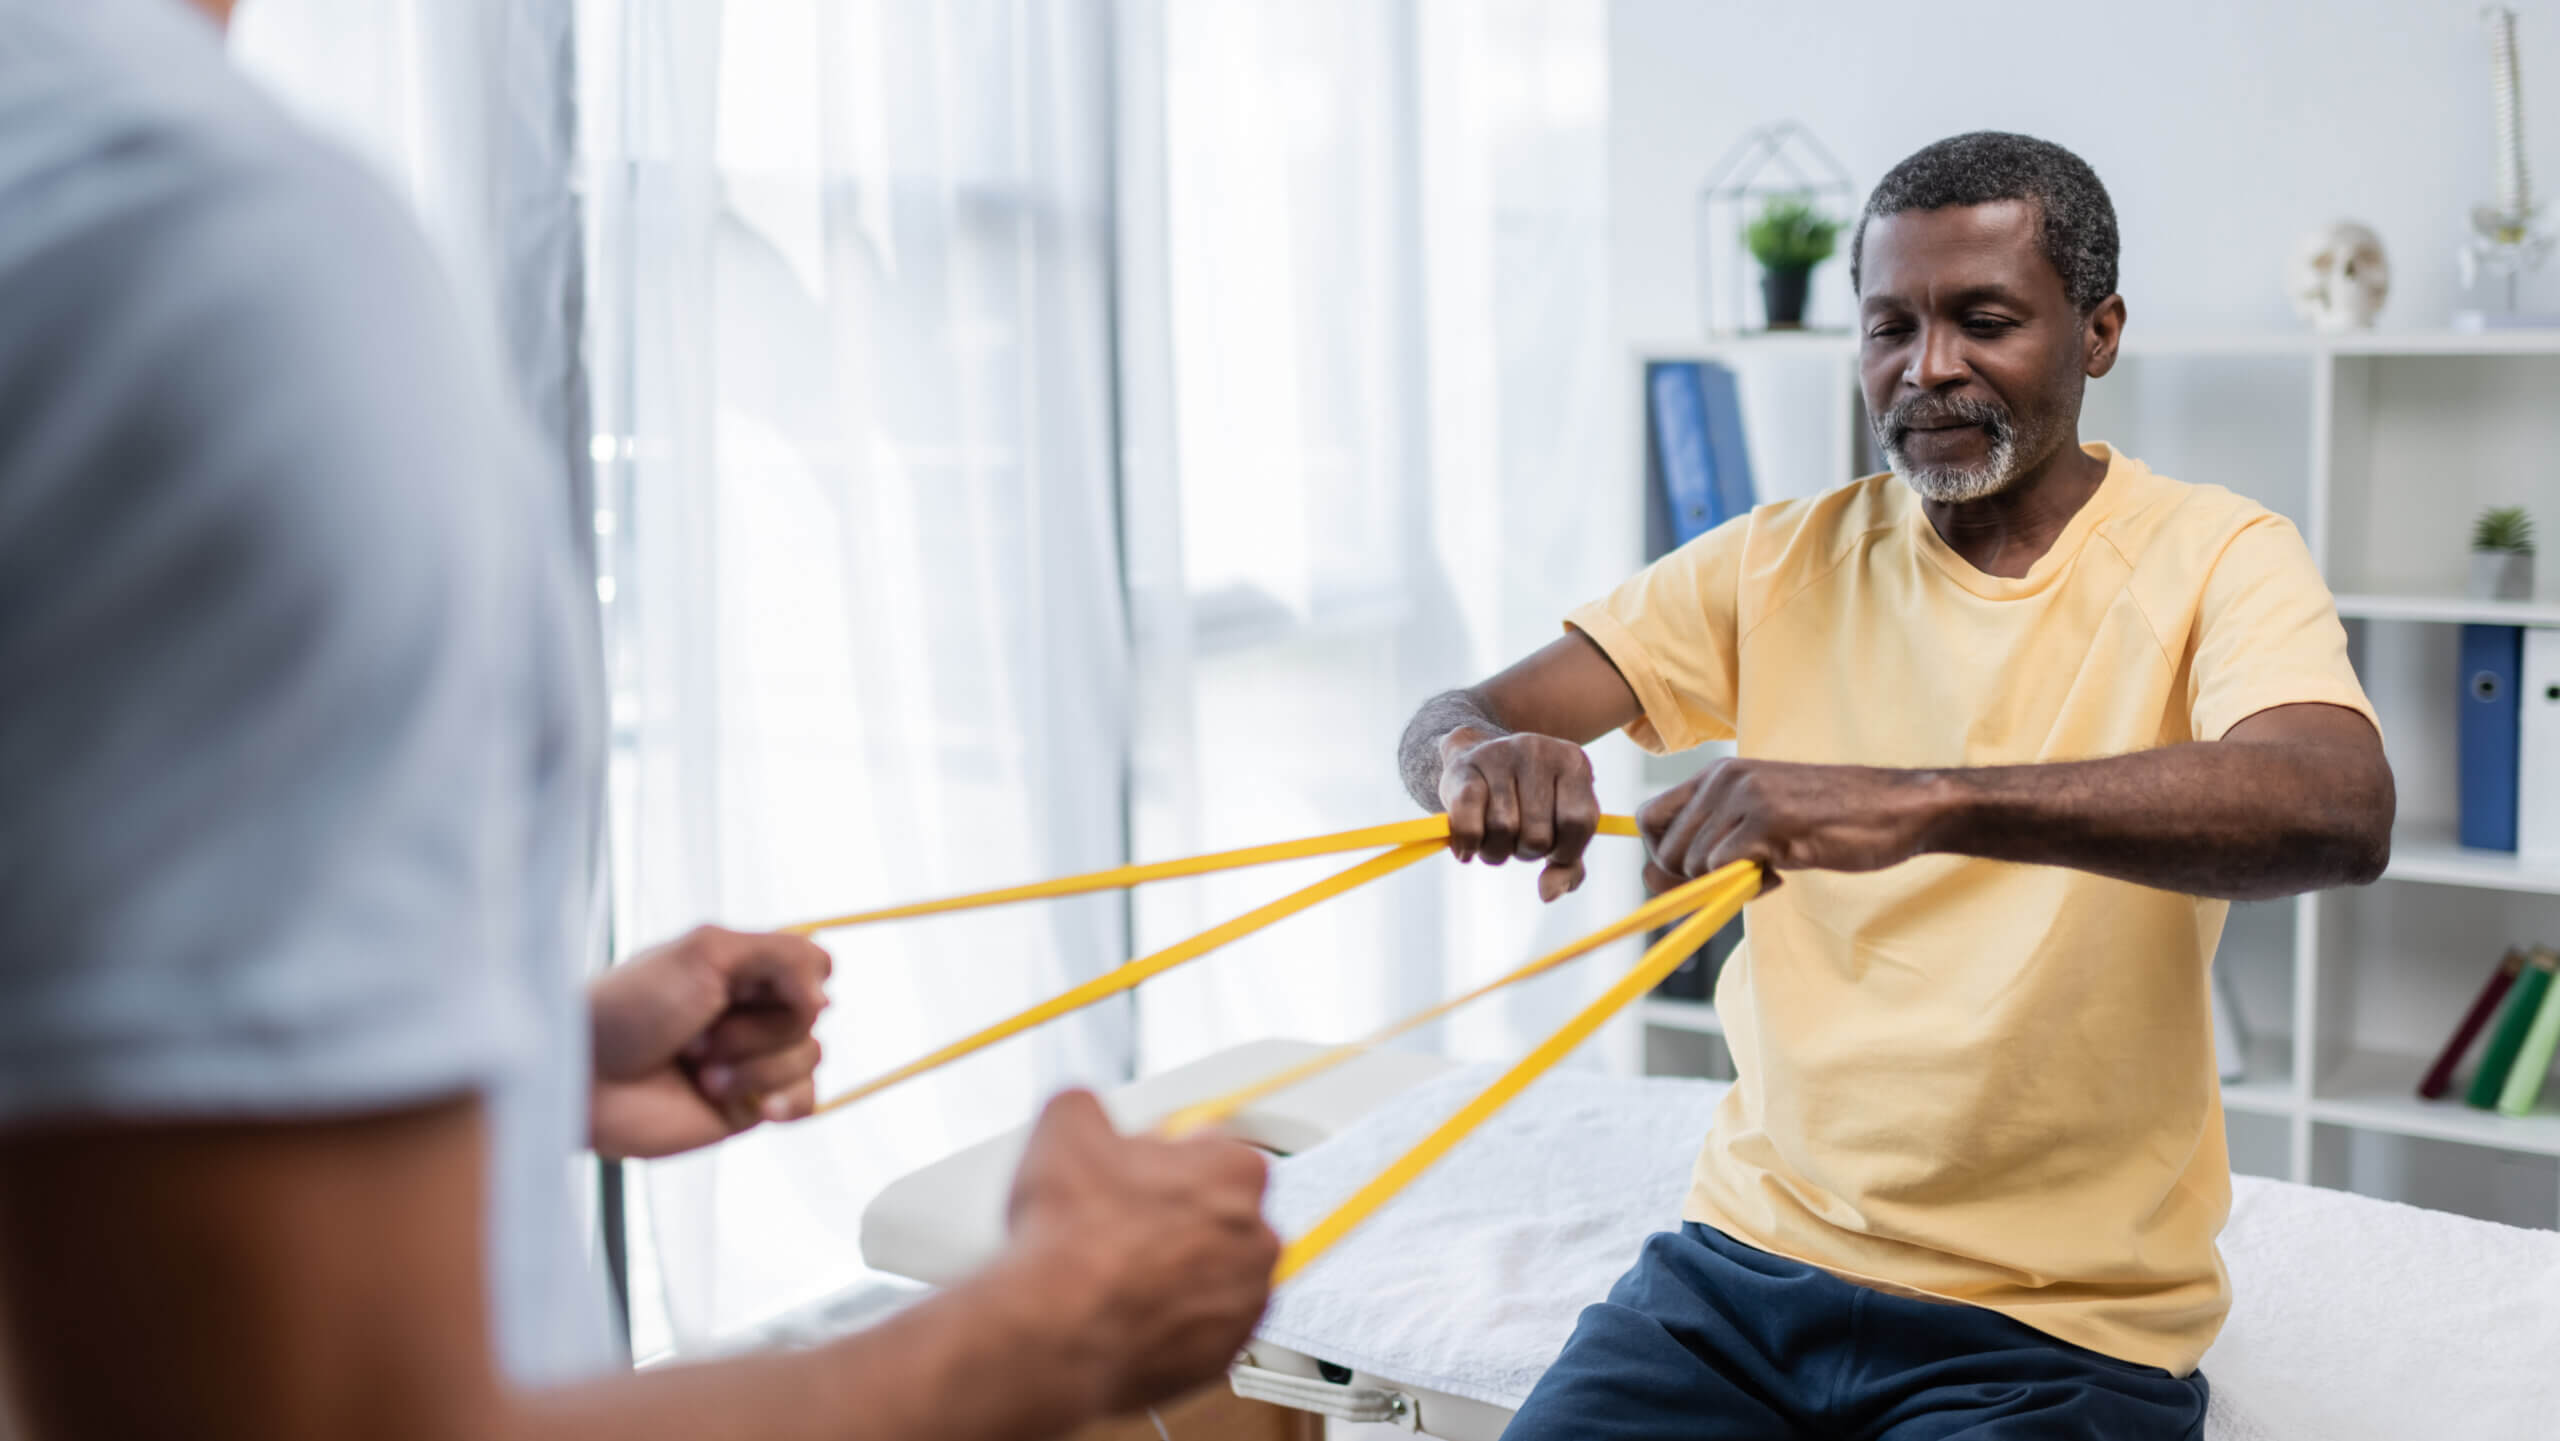 Physical therapy can help teach new exercises and regain mobility after a heart attack. 